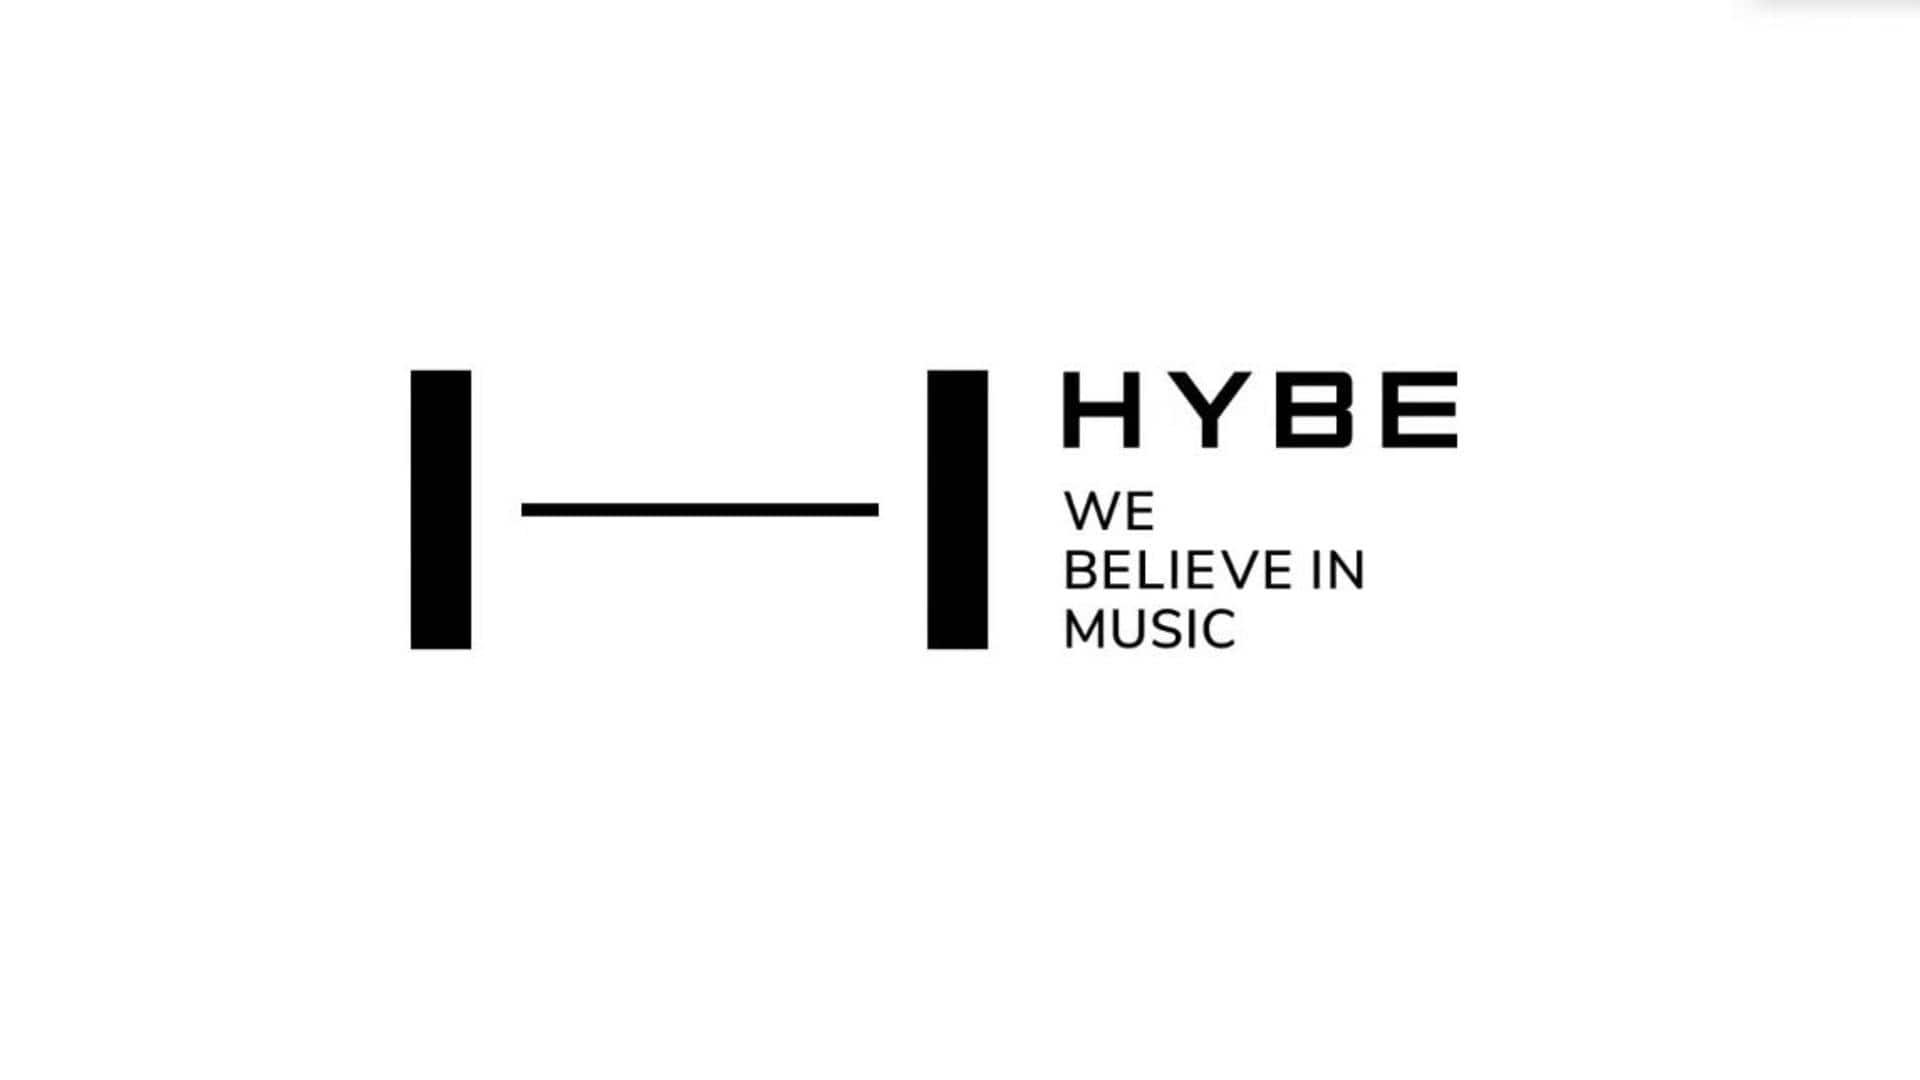 K-pop: HYBE to focus on US market, aims to diversify